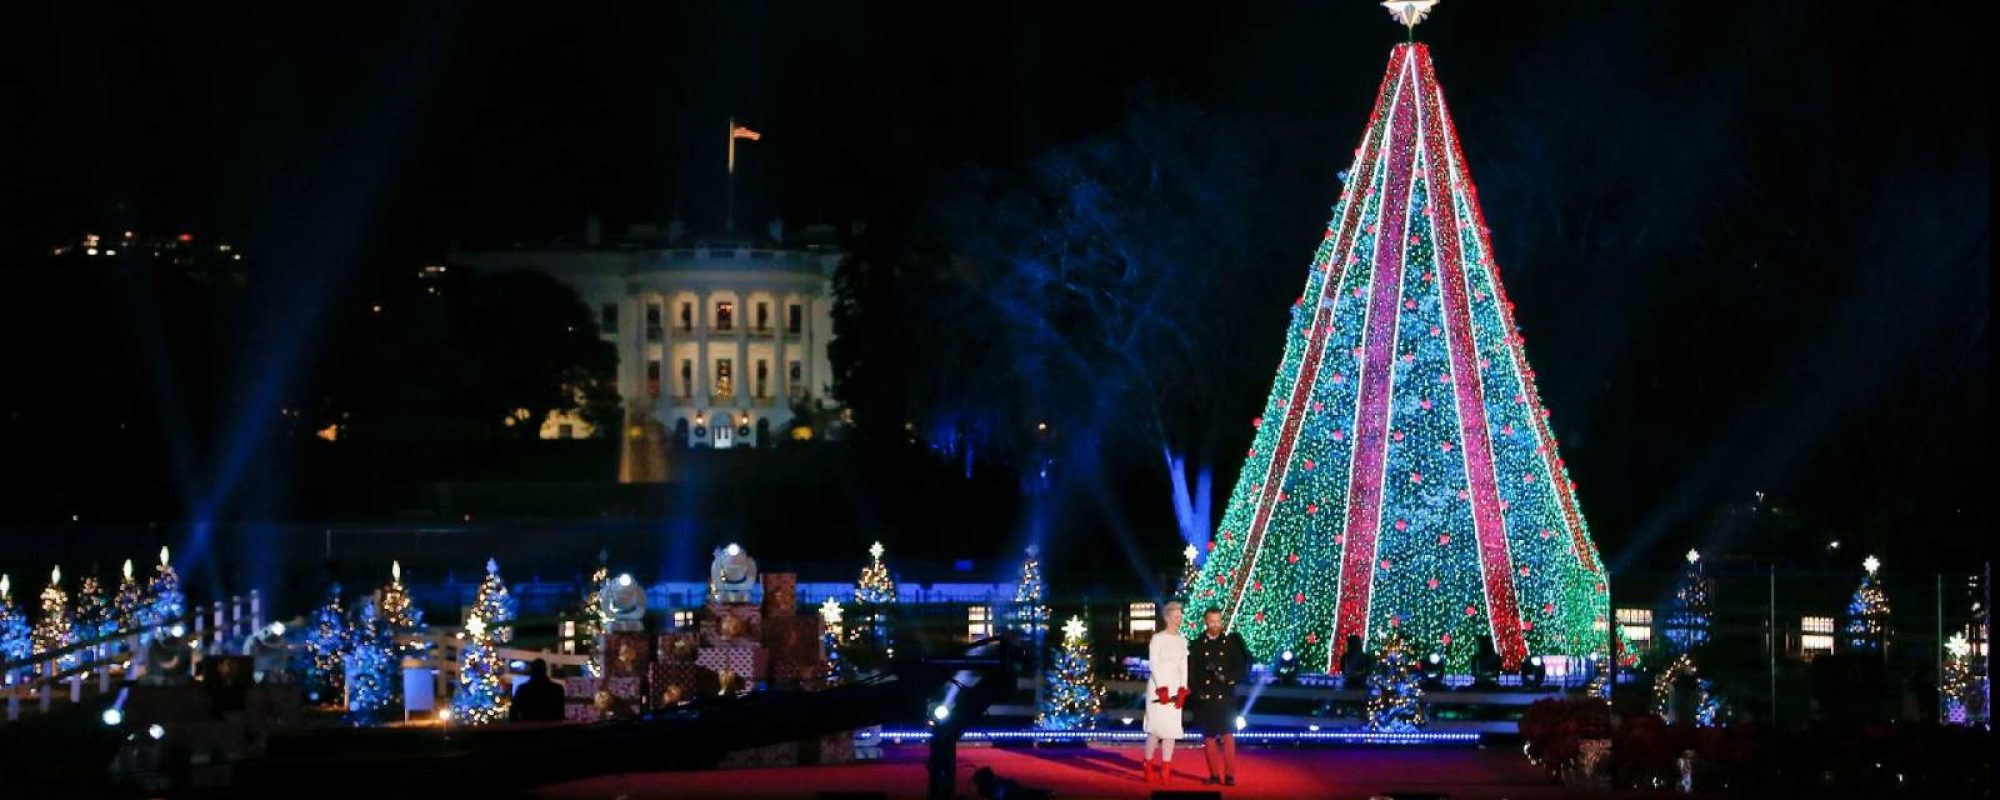 THE 2018 NATIONAL CHRISTMAS TREE LIGHTING CONTINUES A TRADITION THAT BEGAN IN 1923 AND WILL AIR ON OVATION AND REELZ SUNDAY, DECEMBER 2 AT 10PM ET / 7PM PT